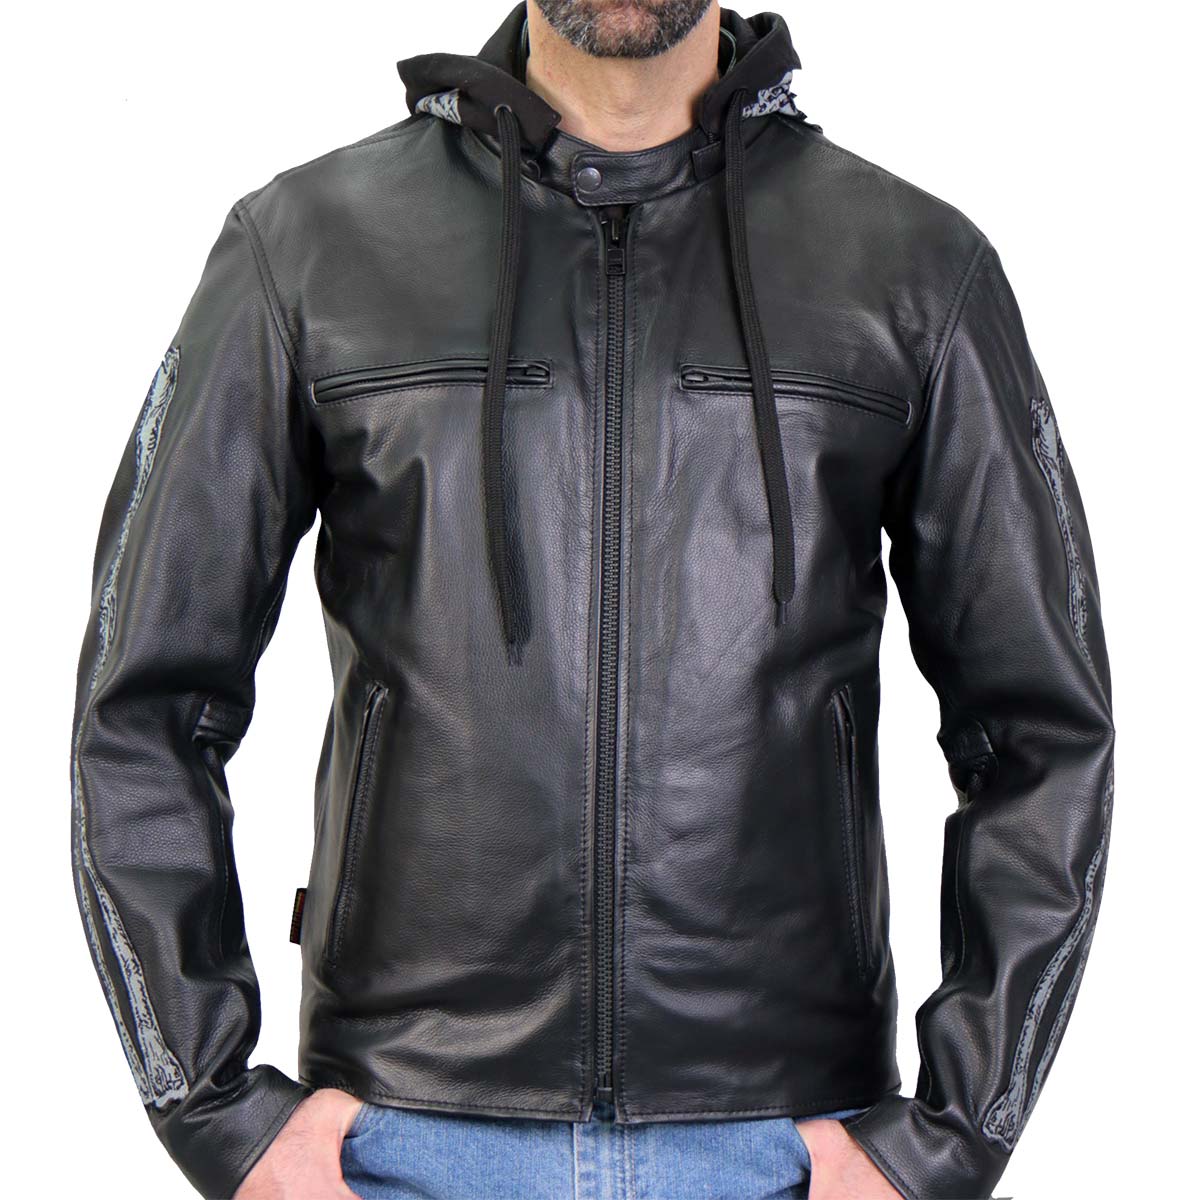 Hot Leathers JKM1031 Men’s ‘Skull and Bones’ Leather Jacket with Flannel Lining